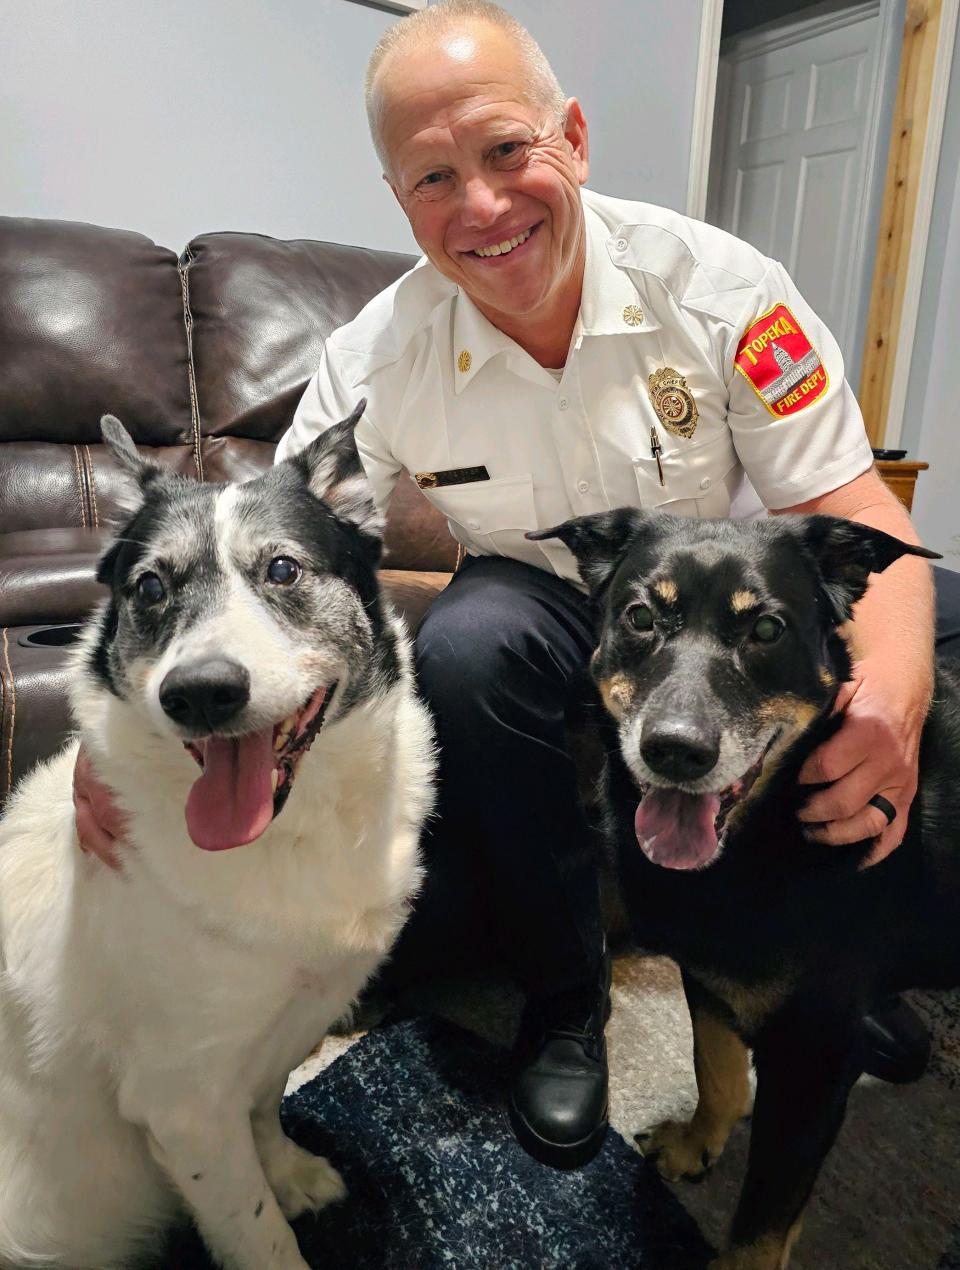 Topeka Fire Chief Randy Phillips posed with his dogs, Patches, left, and Sox, right.